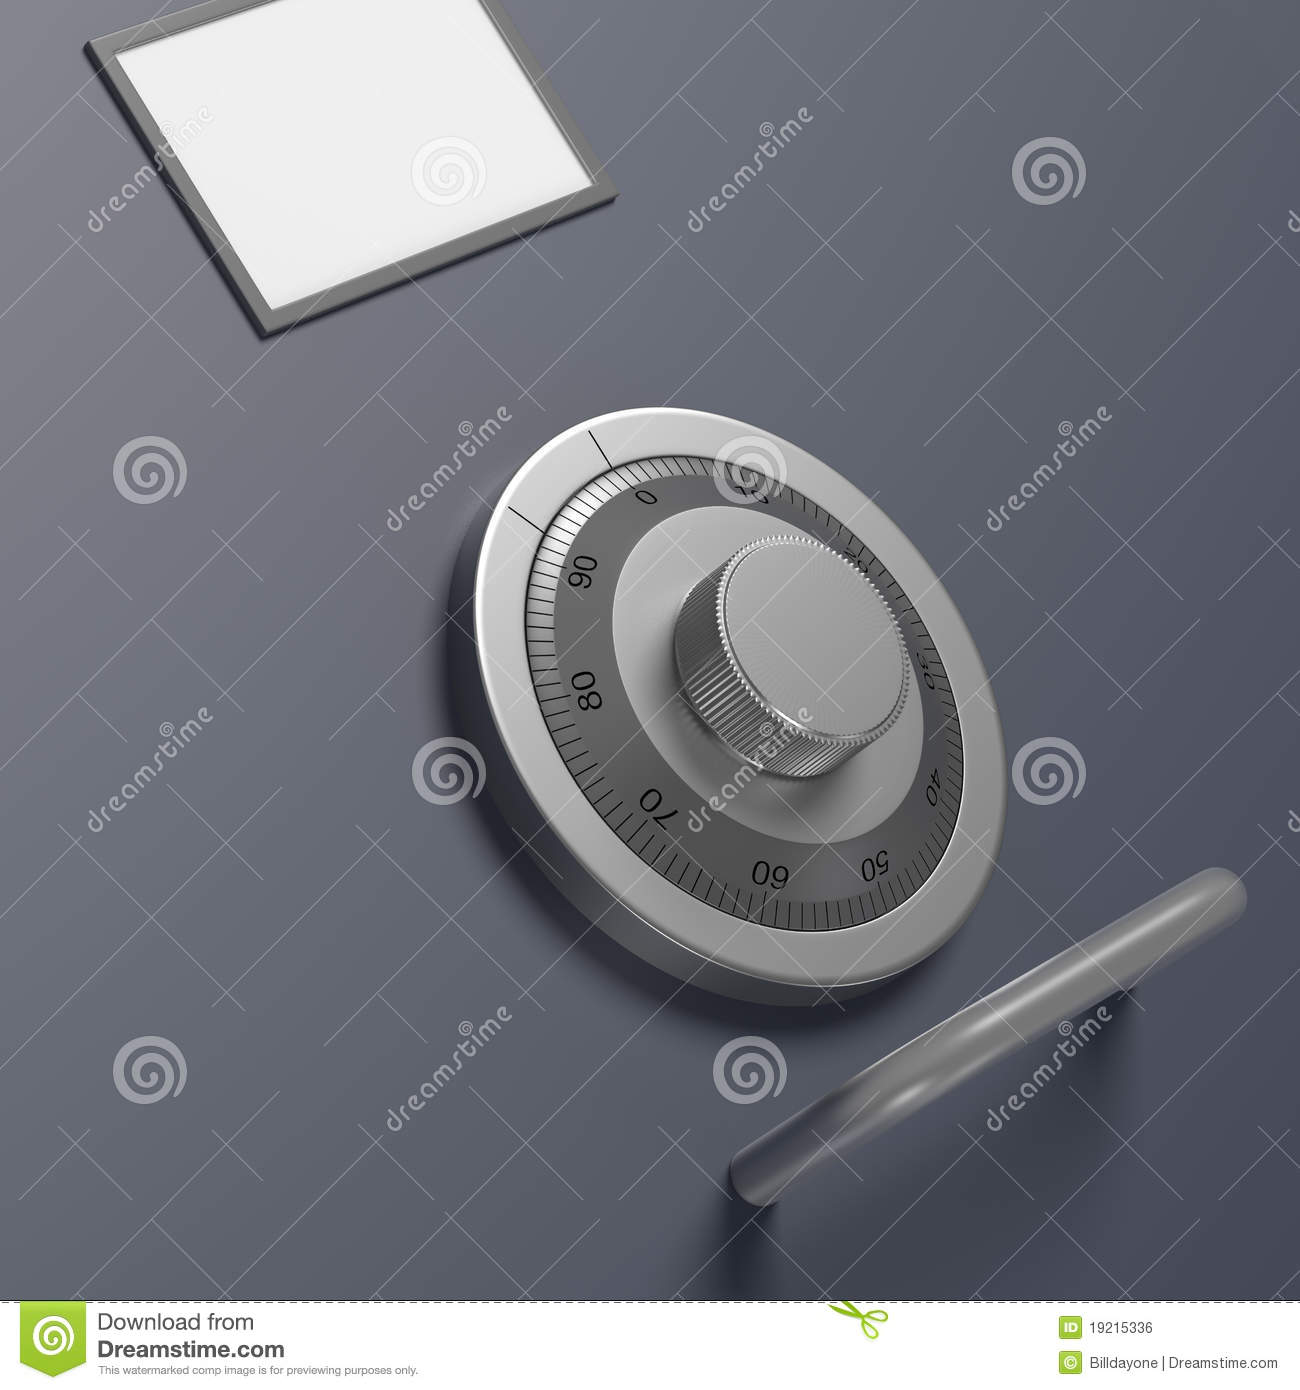 Locked Filing Cabinet With Safe Lock Dial Royalty Free Stock Image    